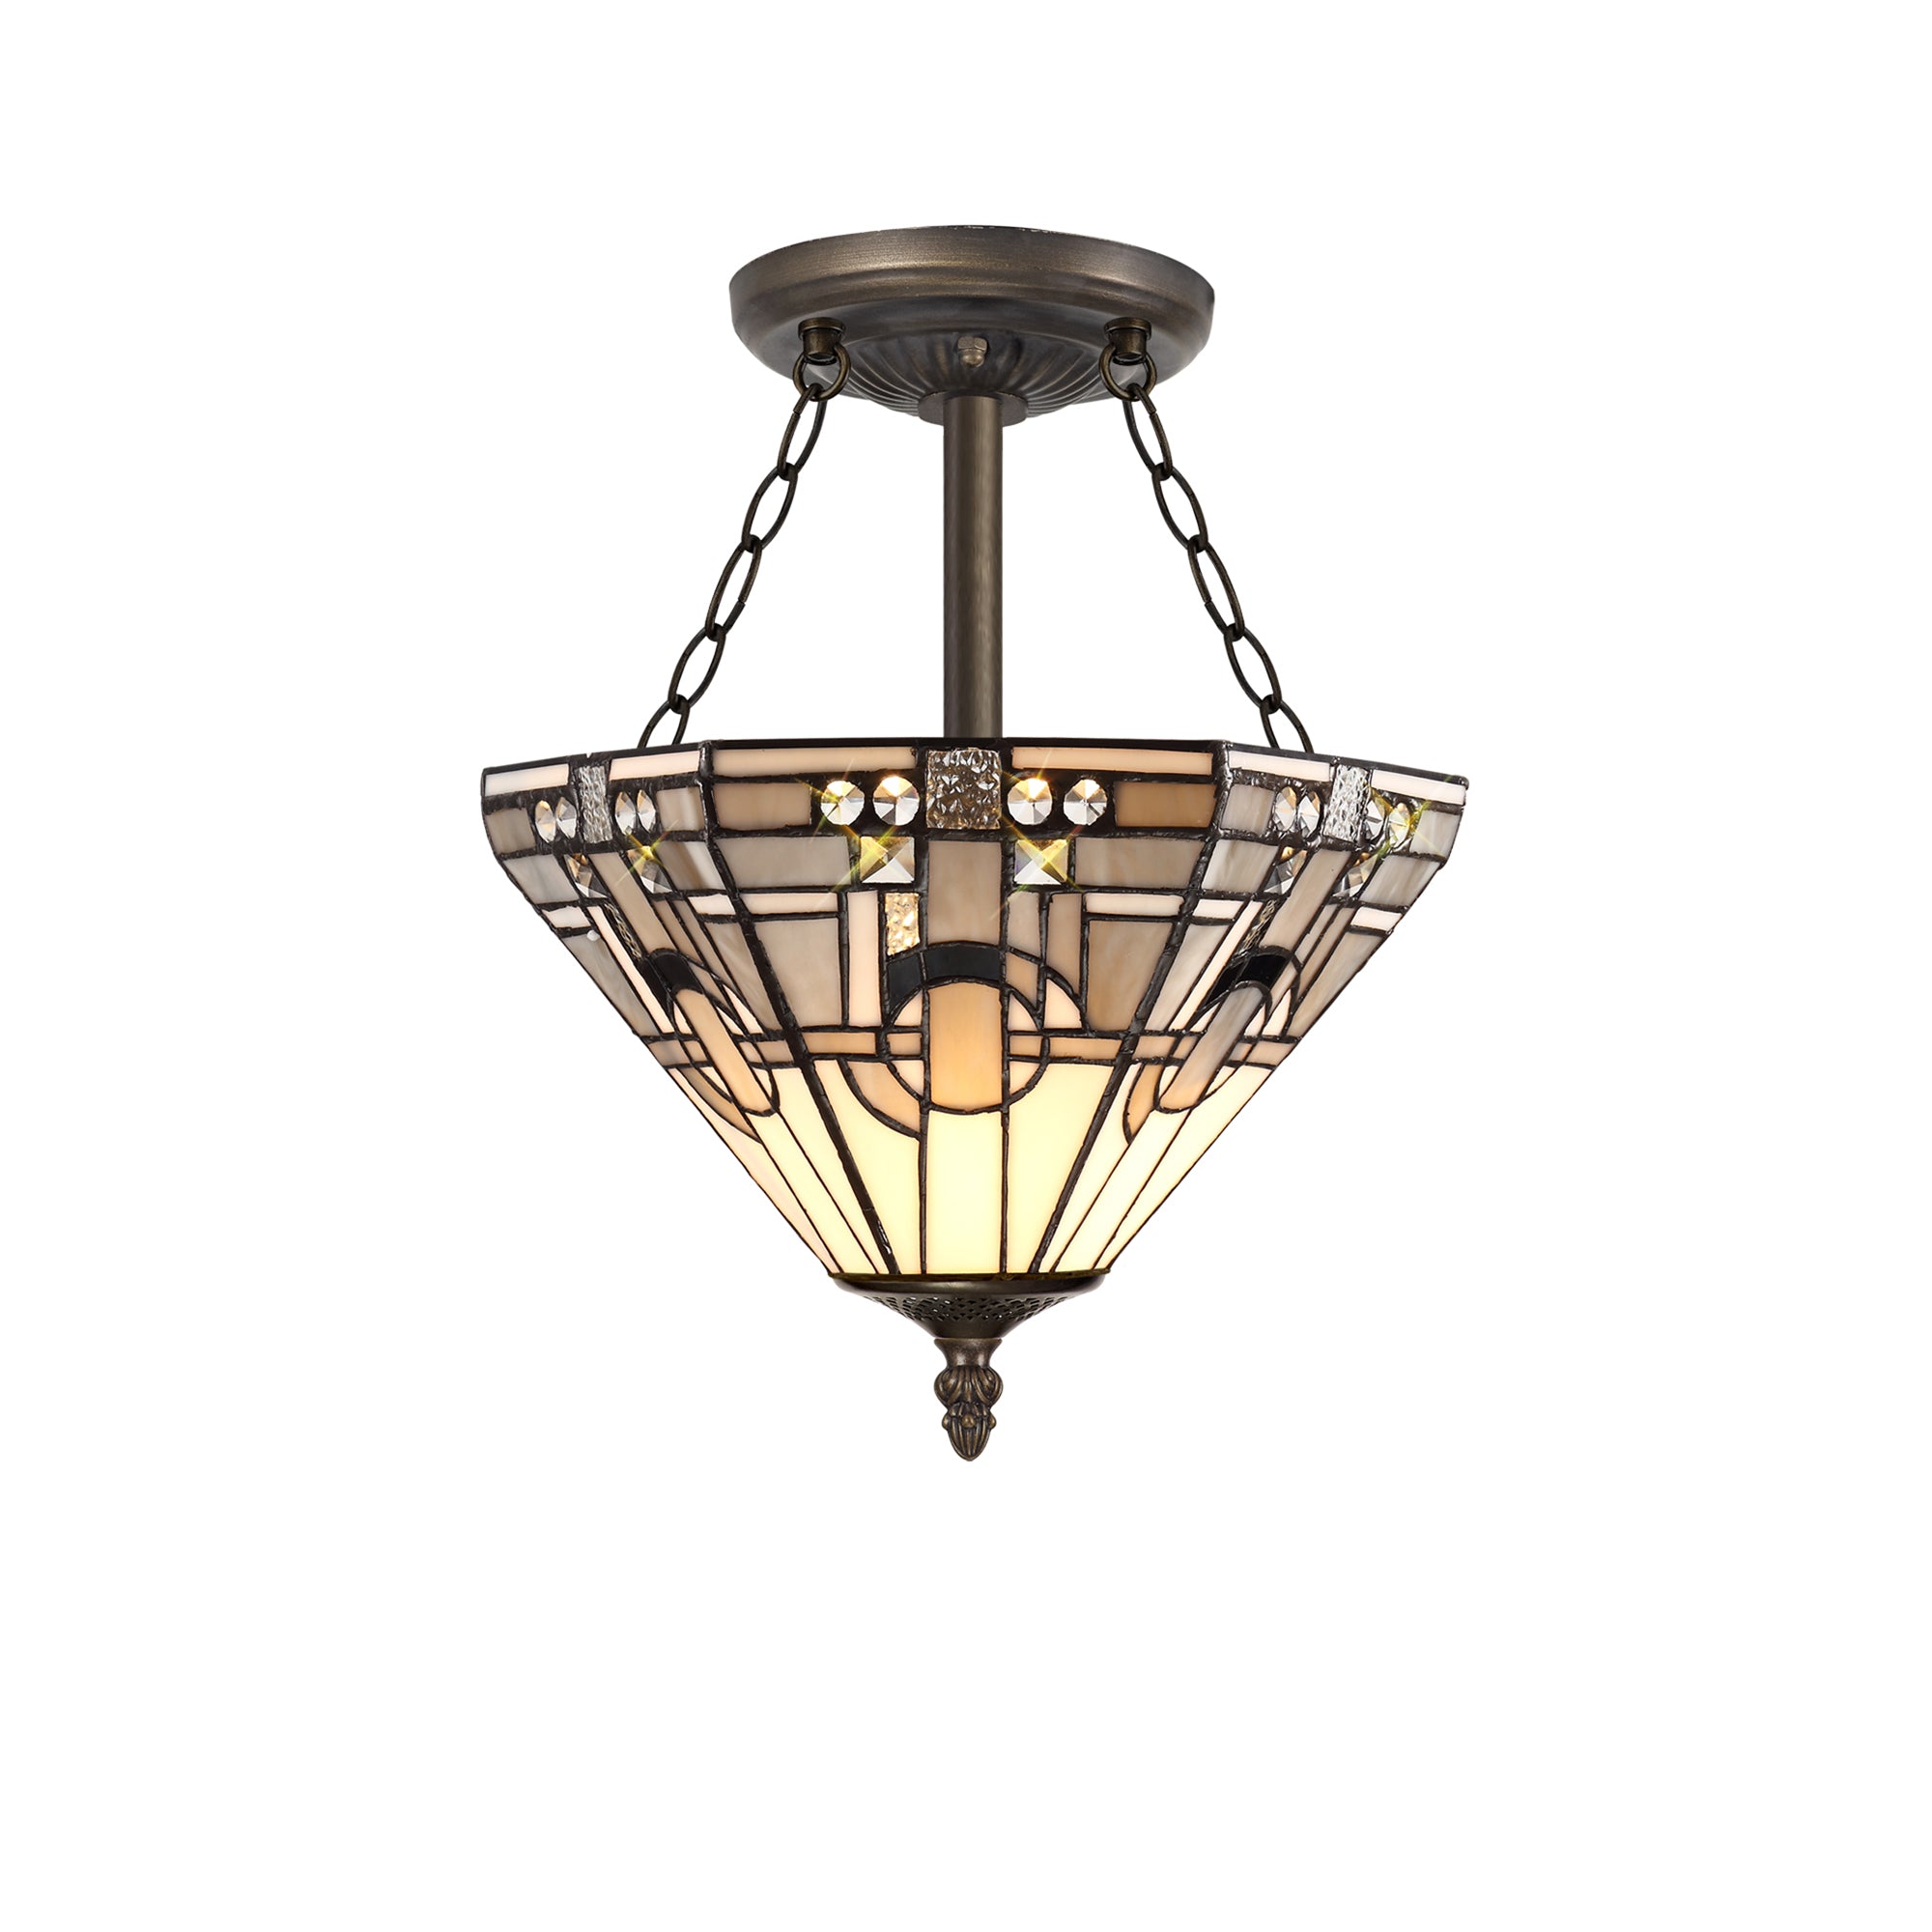 Atek 3 Light E27 Semi Ceiling With Tiffany Shade 30cm Shade, White/Grey/Black/Clear Crystal/Aged Antique Brass